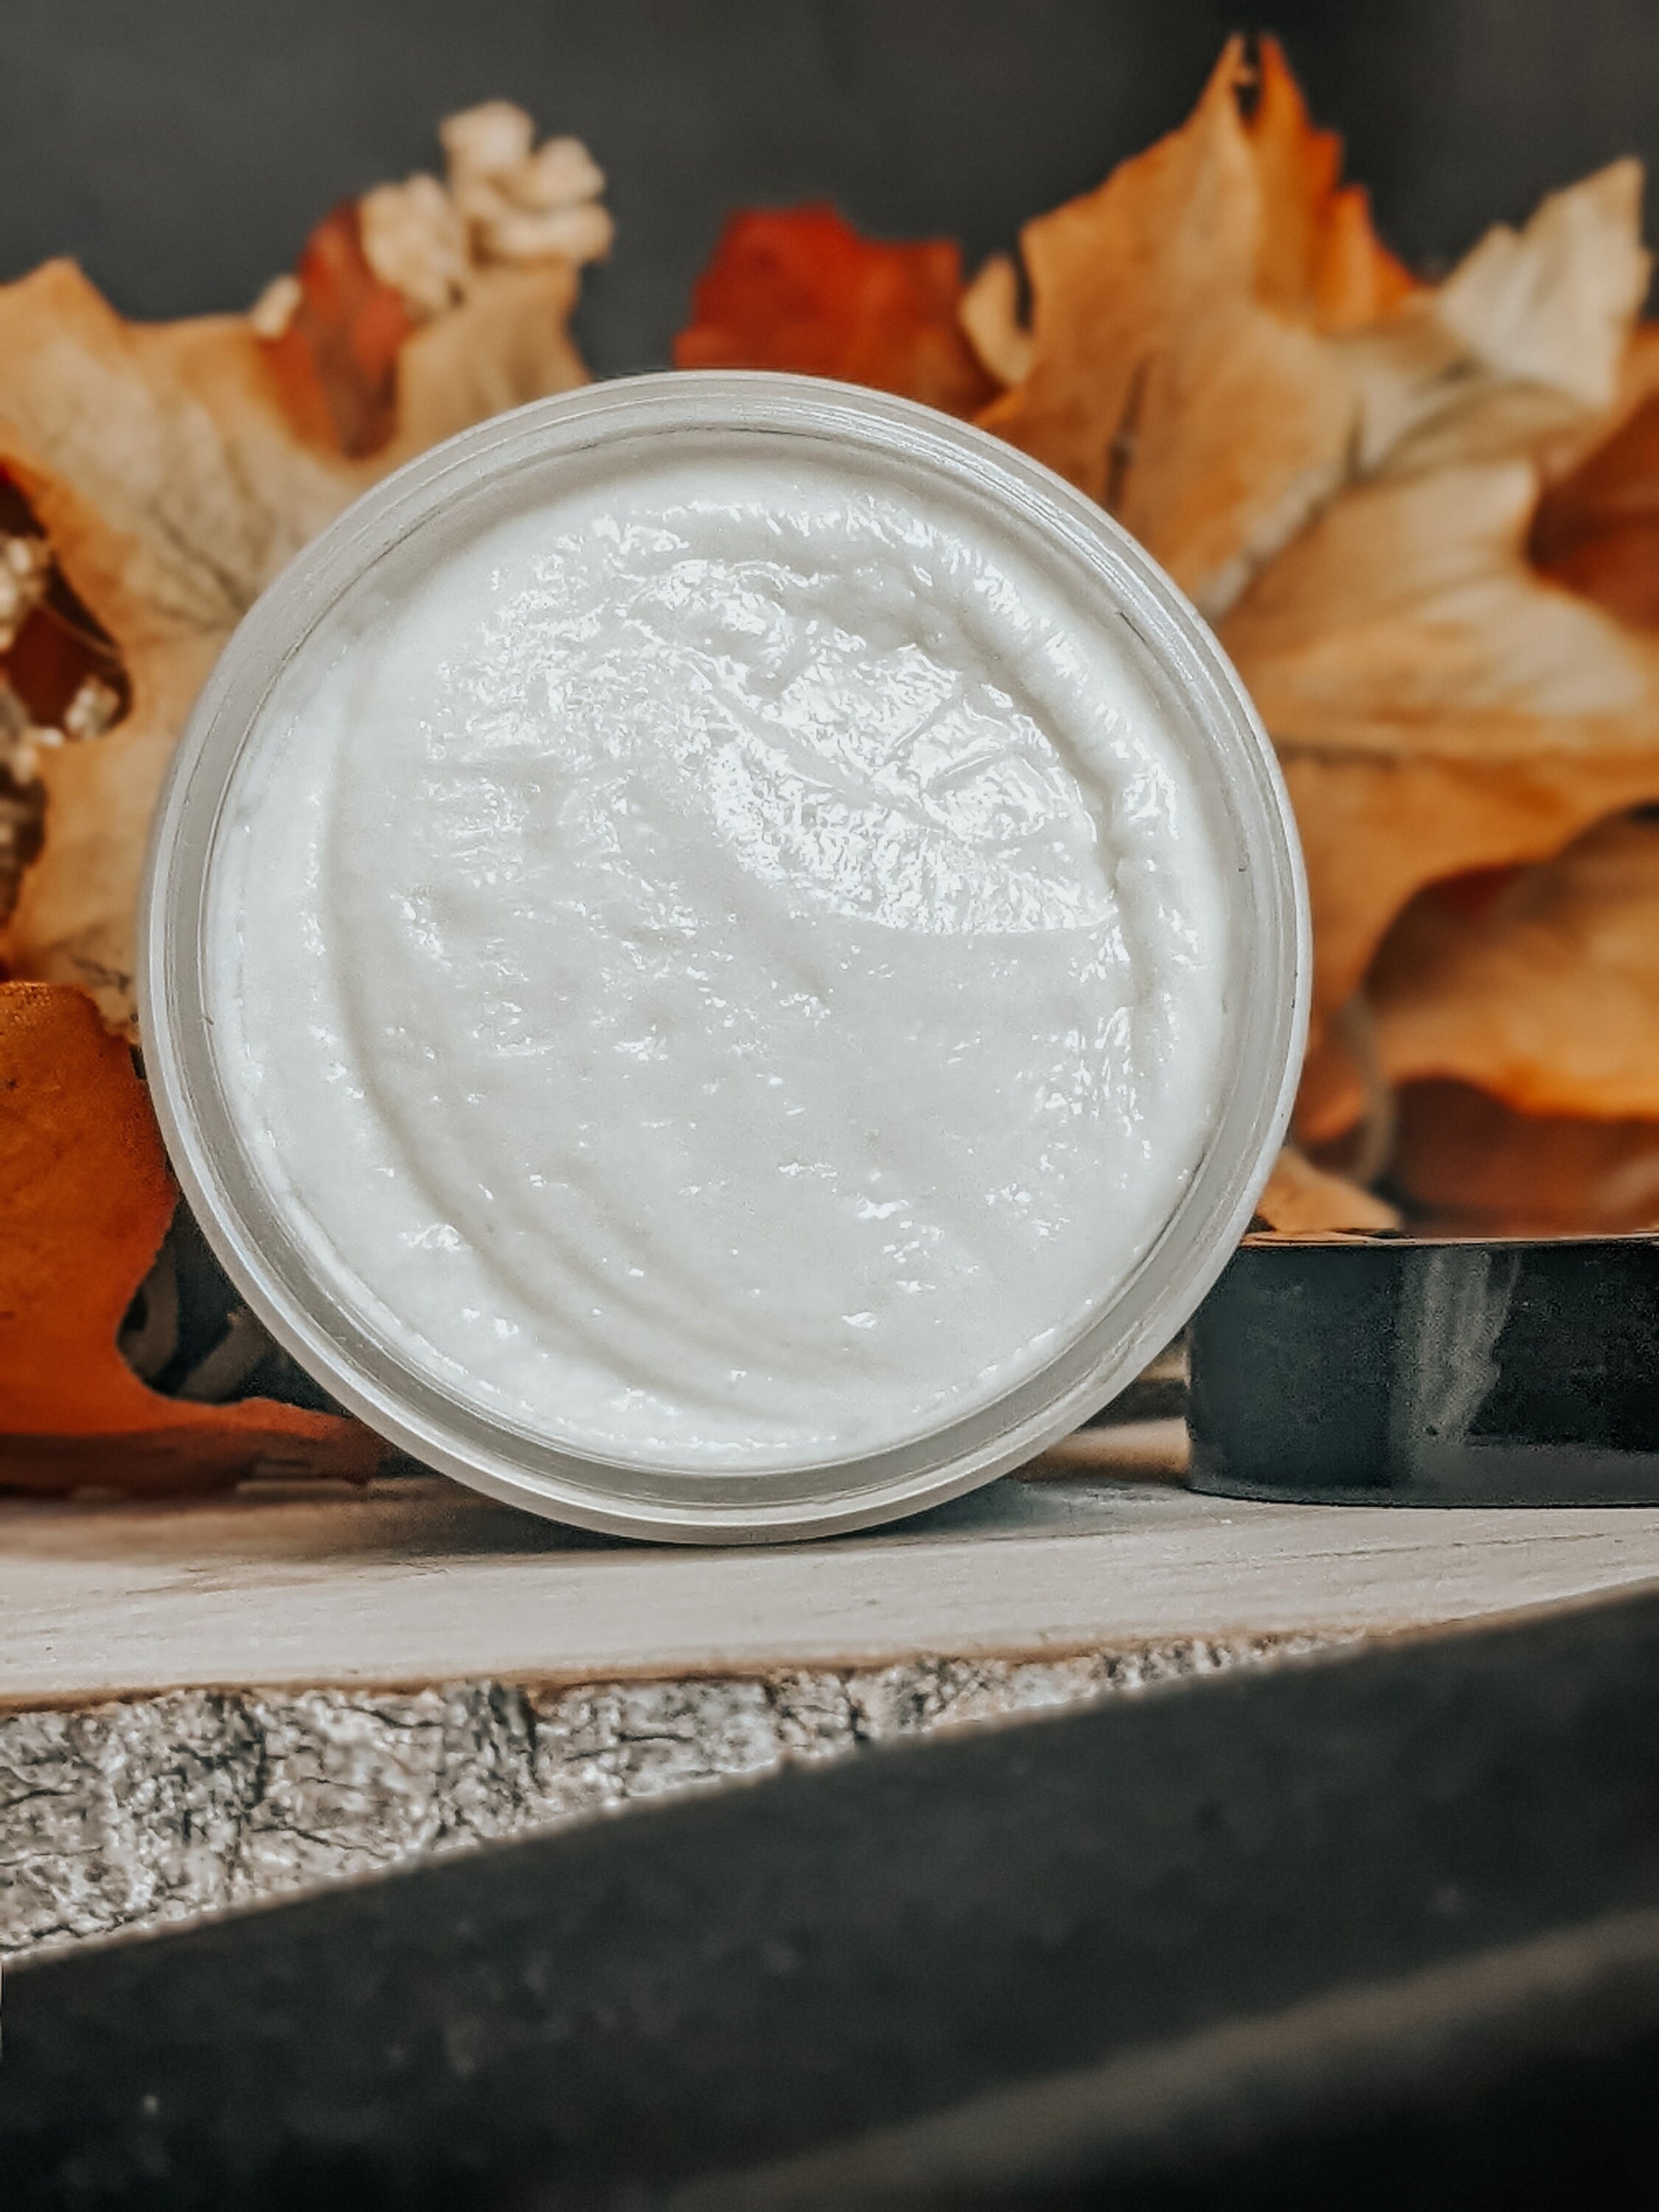 SALEM - Fresh breeze and ylang scented, Vegan whipped body butter, Shea, mango butter, moisturizer, gothic skincare, fall fragrance, autumn